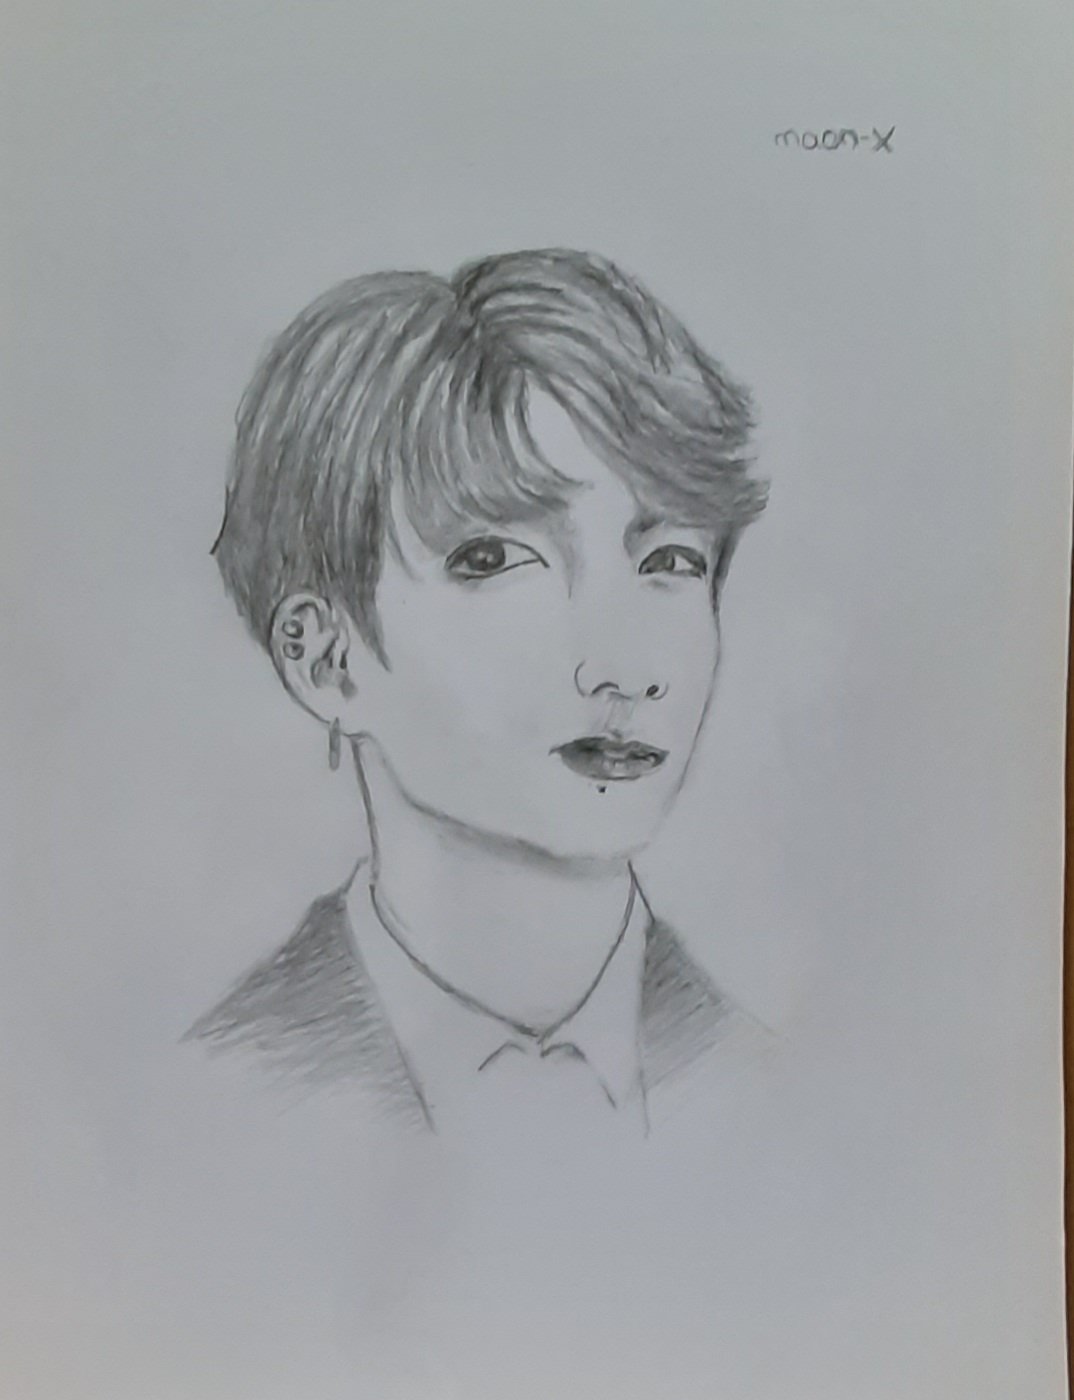 Buy BTS Jeon Jungkook Chest Pencil Sketch A6 Art Print drawing Online in  India  Etsy